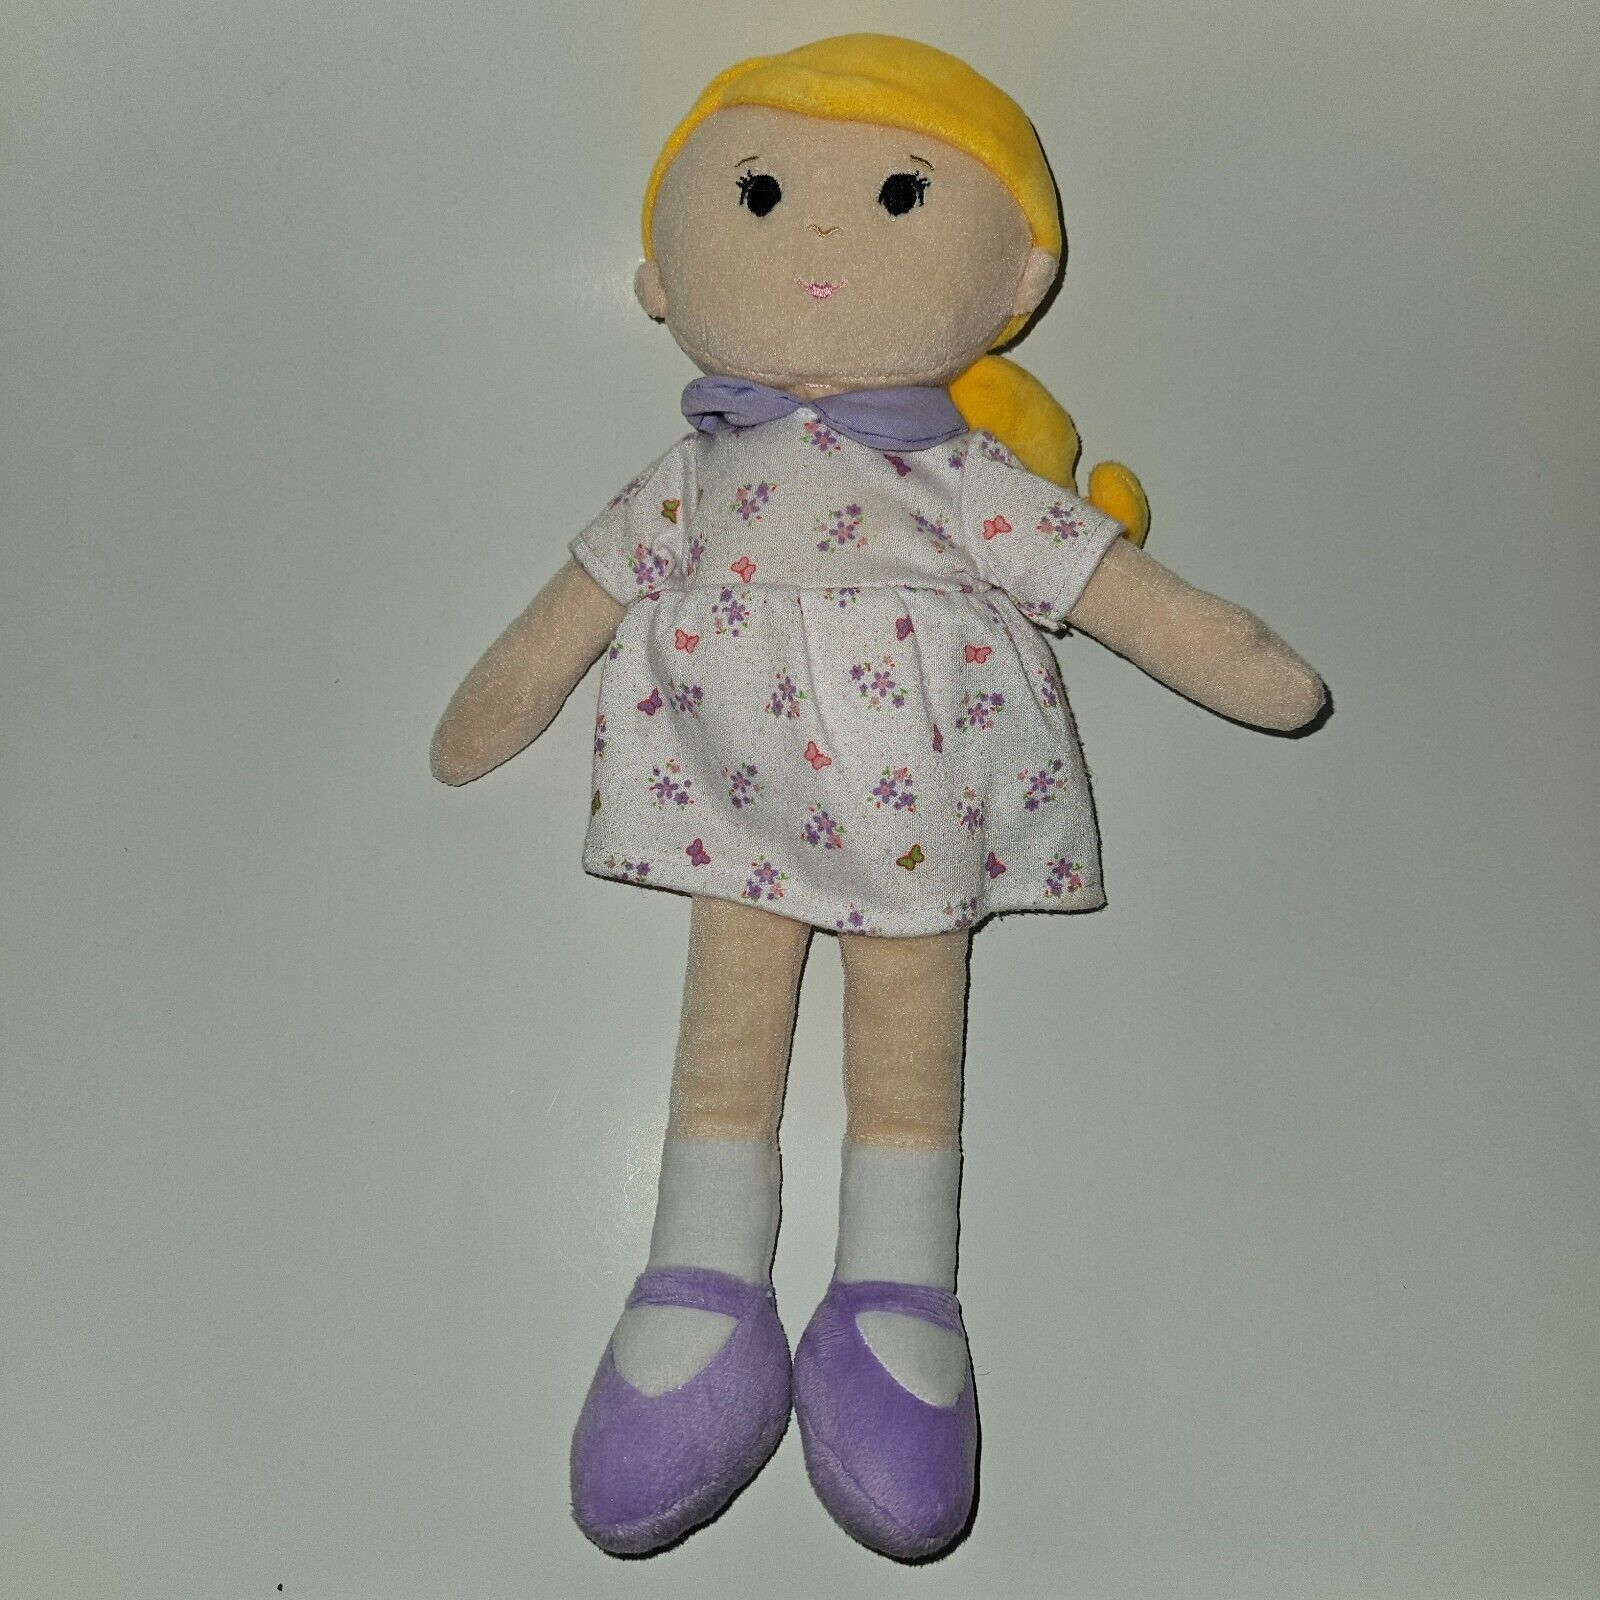 Toys R Us Blond Doll Plush Lovey 13" You & Me Baby Toy Purple Floral Dress 2017 - $39.55